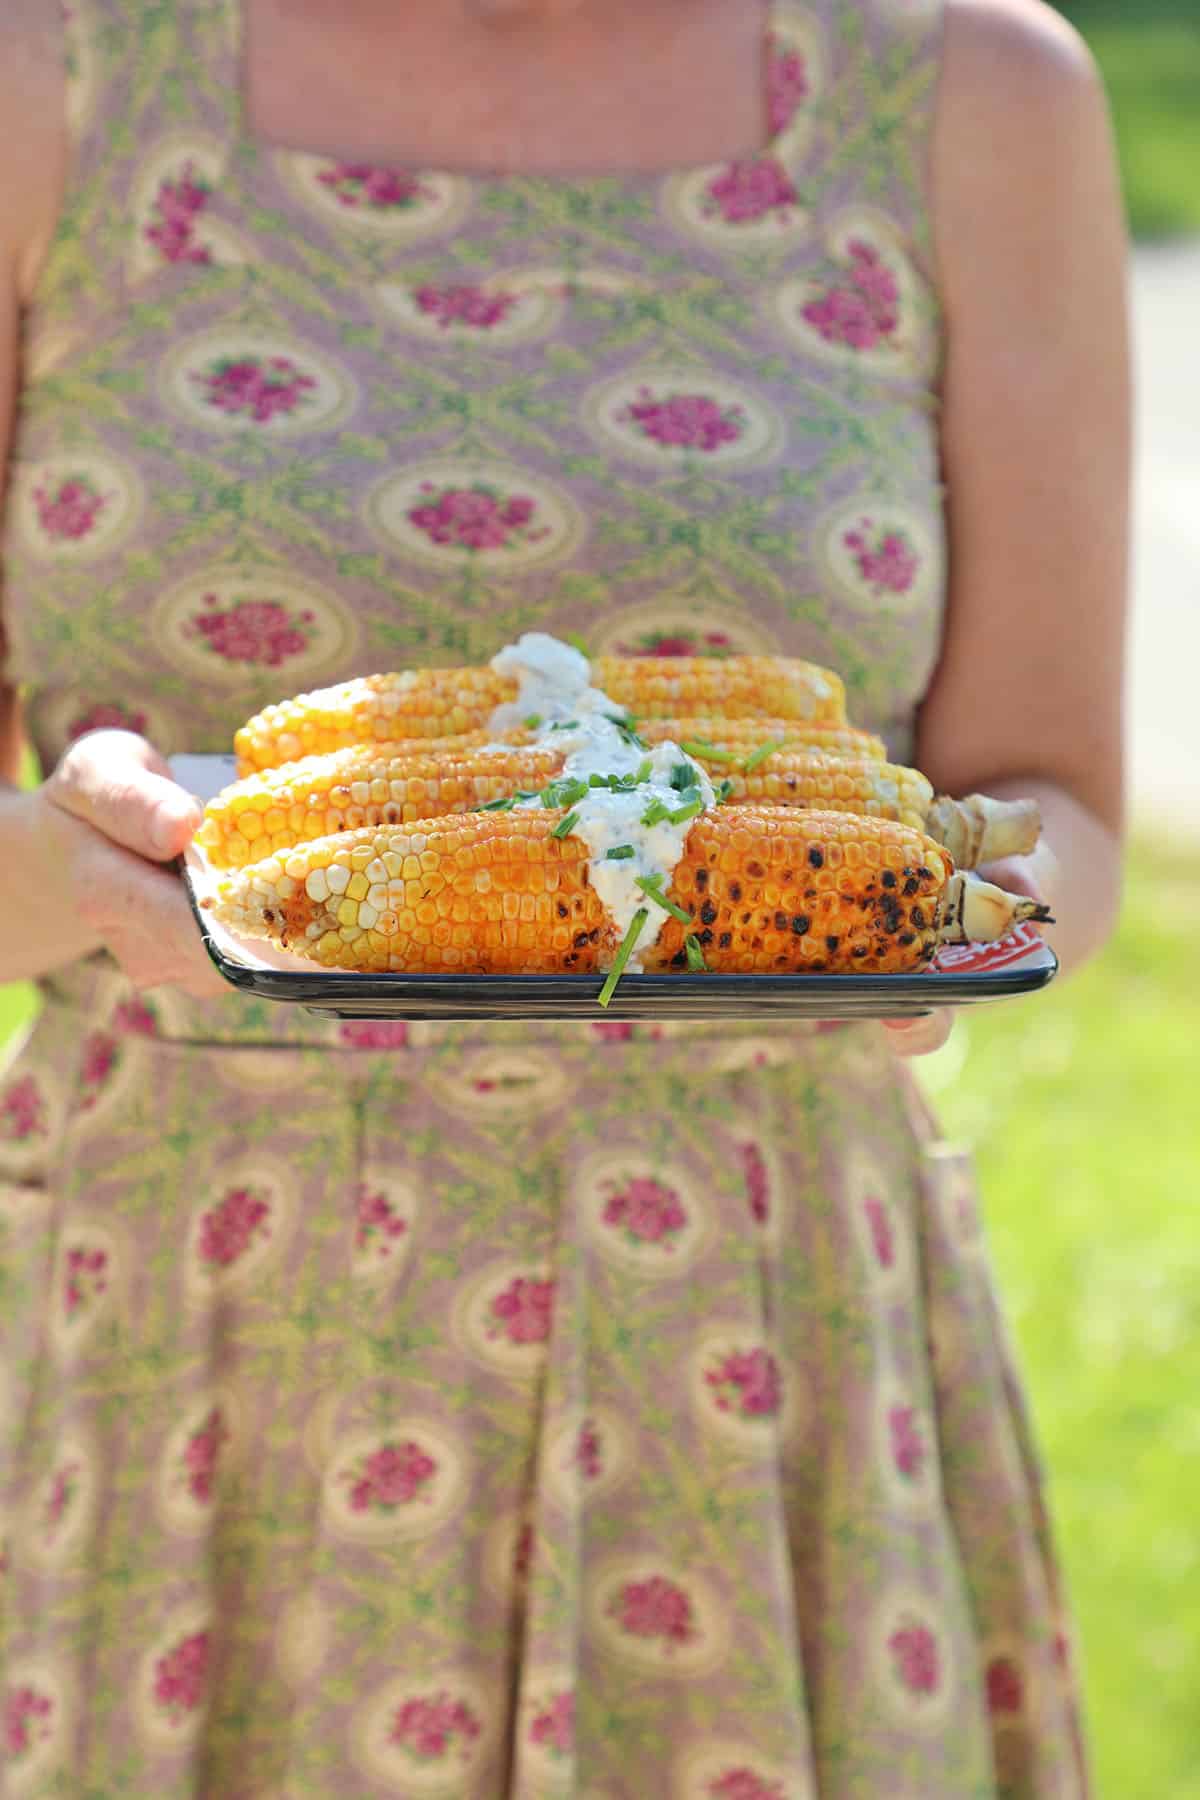 Platter of buffalo corn with vegan blue cheese being held.